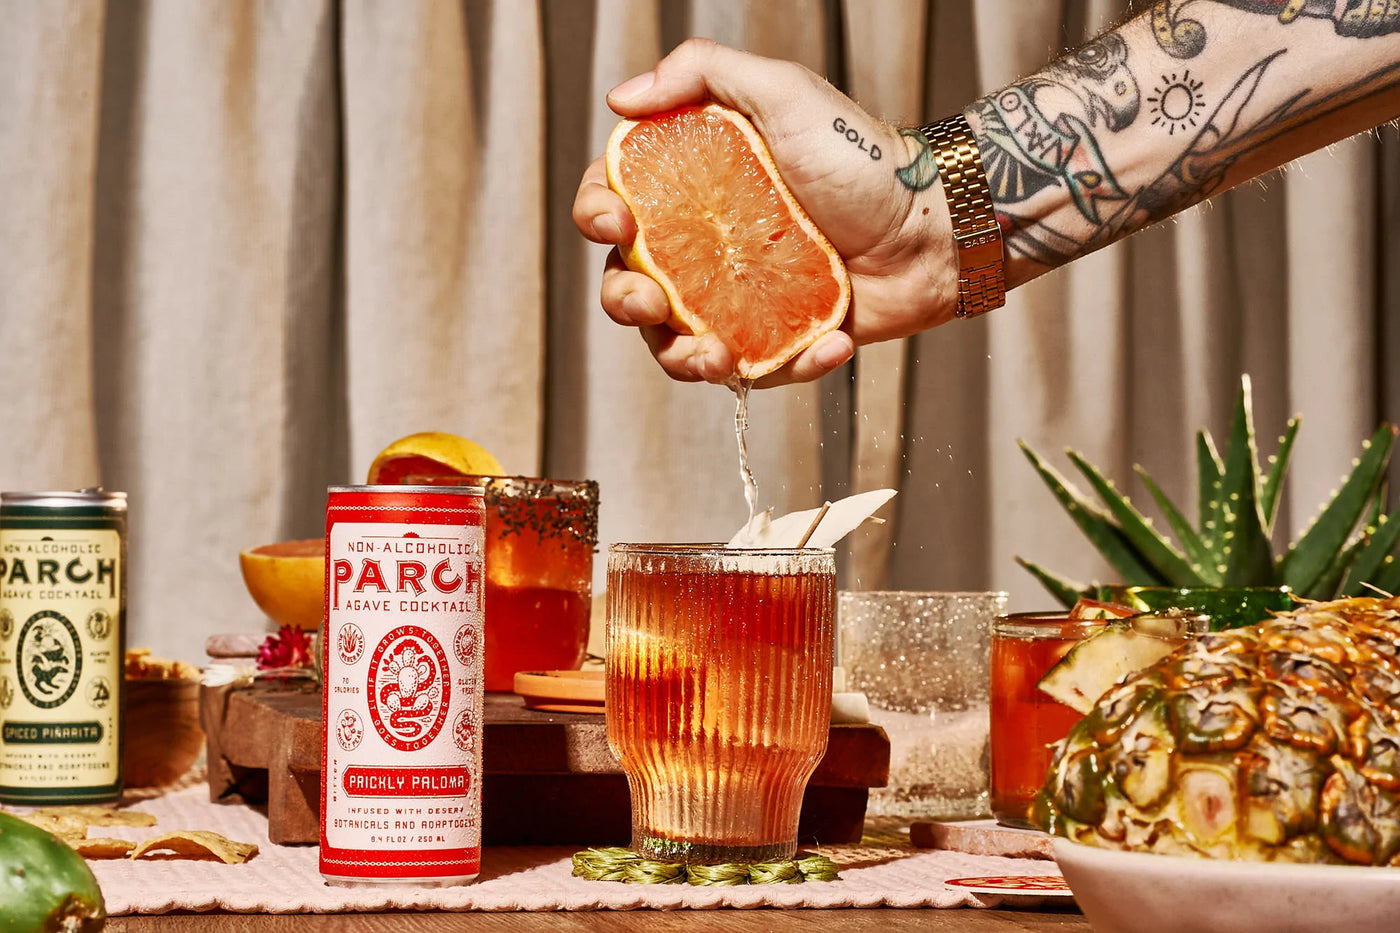 Parch adaptogenic cocktails - conscious drinking - drink responsibly and still have fun